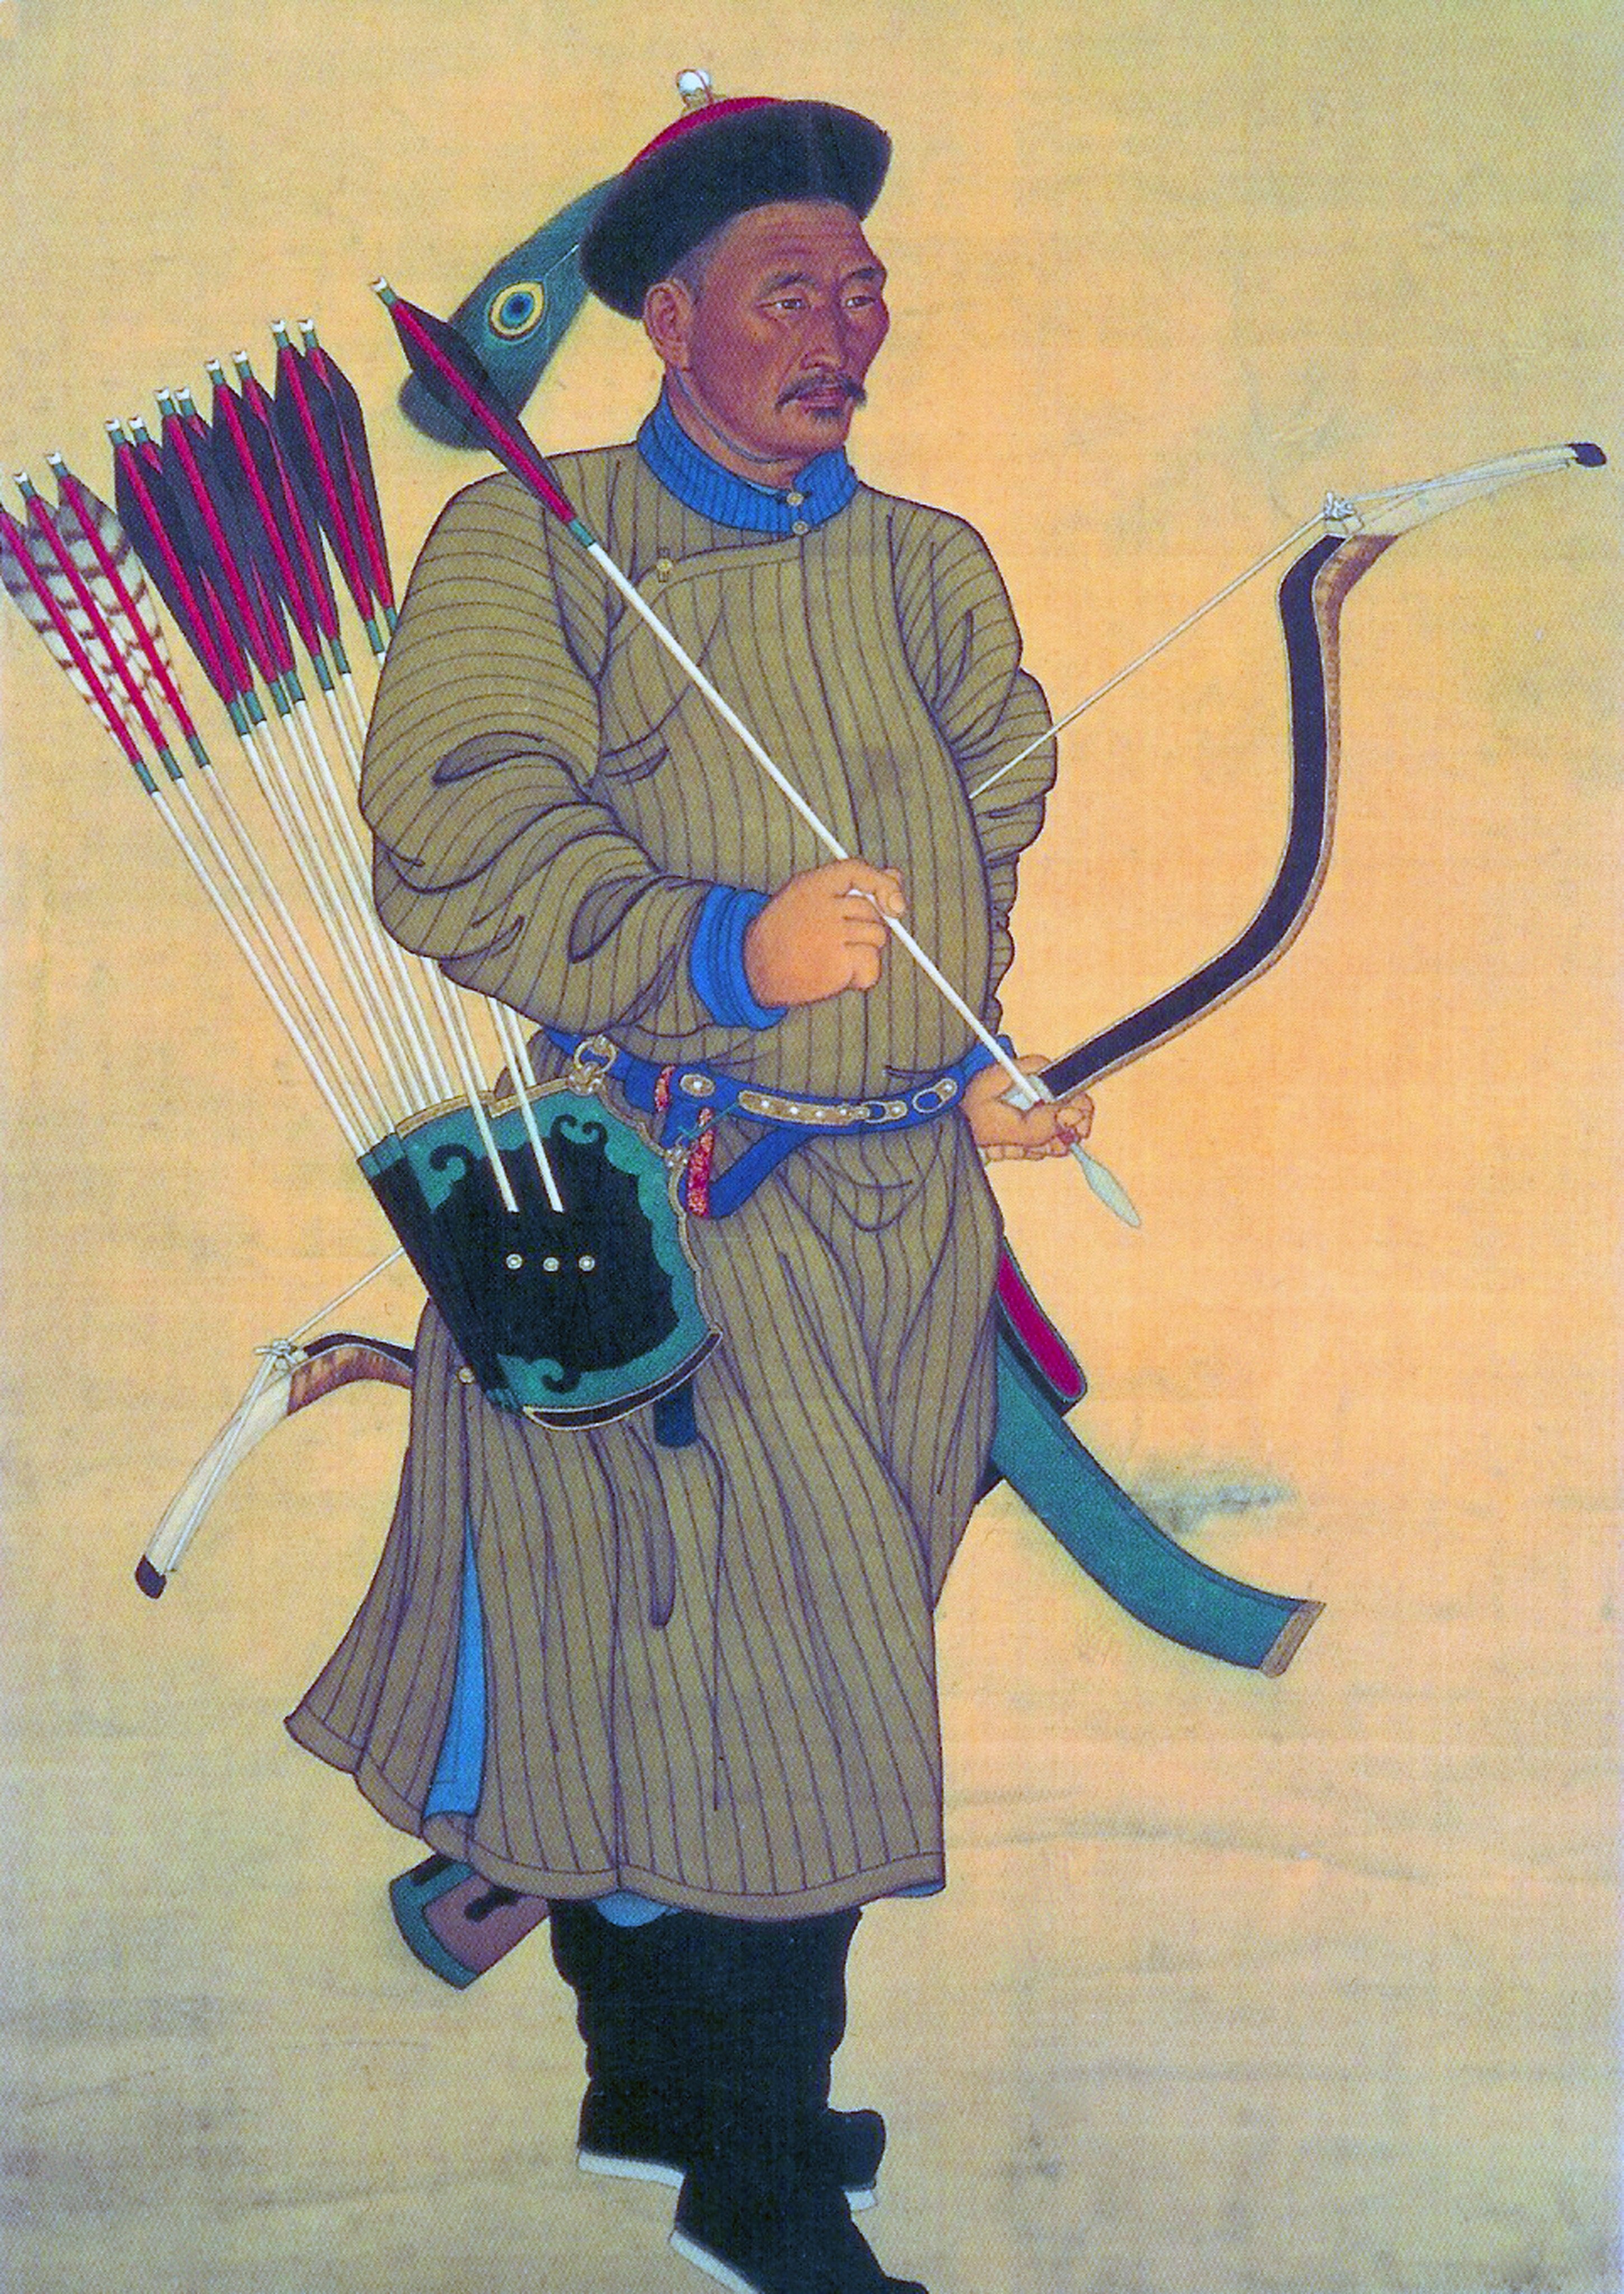 Qing Imperial court portraits of senior Manchu military officers, known as Bannermen, mid-18th century. From the time China was brought under the rule of the Qing dynasty (1644 - 1683), the banner soldiers became more professional and bureaucratised. Once the Manchus took over governing, they could no longer satisfy the material needs of soldiers by garnishing and distributing booty; instead, a salary system was instituted, ranks standardised, and the Bannermen became a sort of hereditary military caste, though with a strong ethnic inflection. Banner soldiers took up permanent positions, either as defenders of the capital, Beijing, where roughly half of them lived with their families, or in the provinces, where 18 garrisons were established. The largest banner garrisons throughout most of the Qing dynasty were at Beijing, followed by Xi’an and Hangzhou. Sizable banner populations were also placed in Manchuria and at strategic points along the Great Wall, the Yangtze River and Grand…